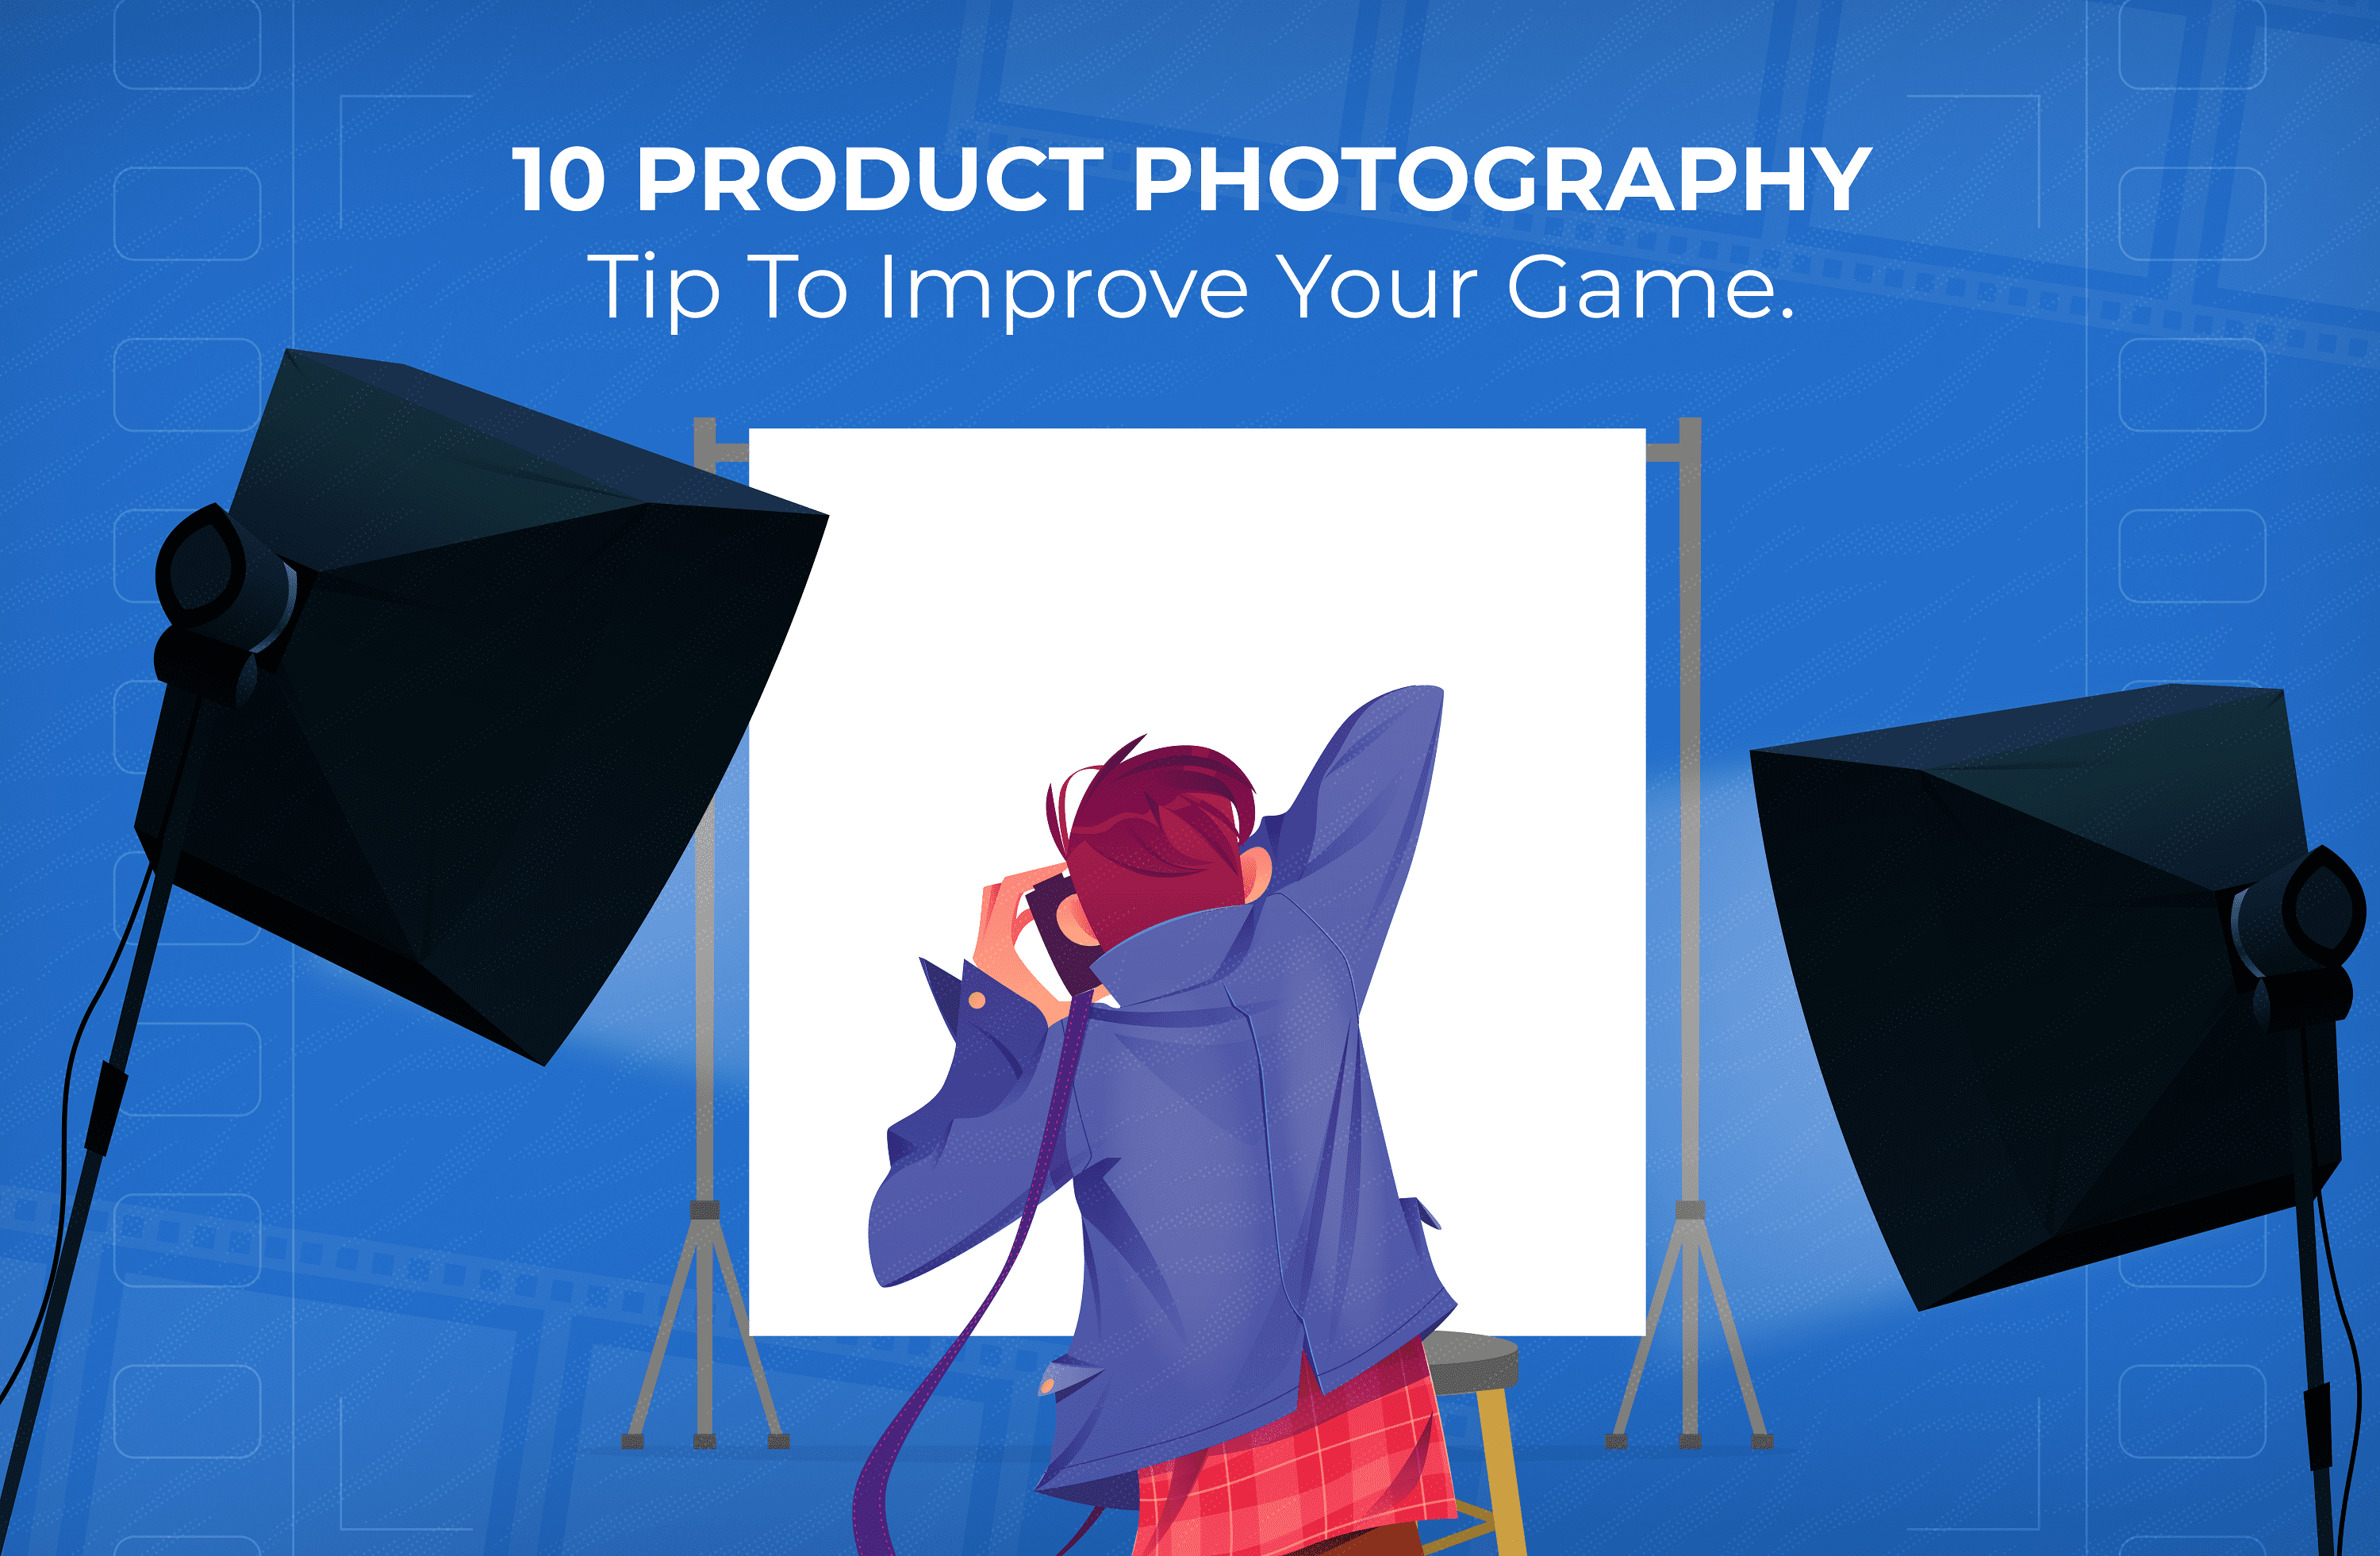 10 product photography tips to improve your game.